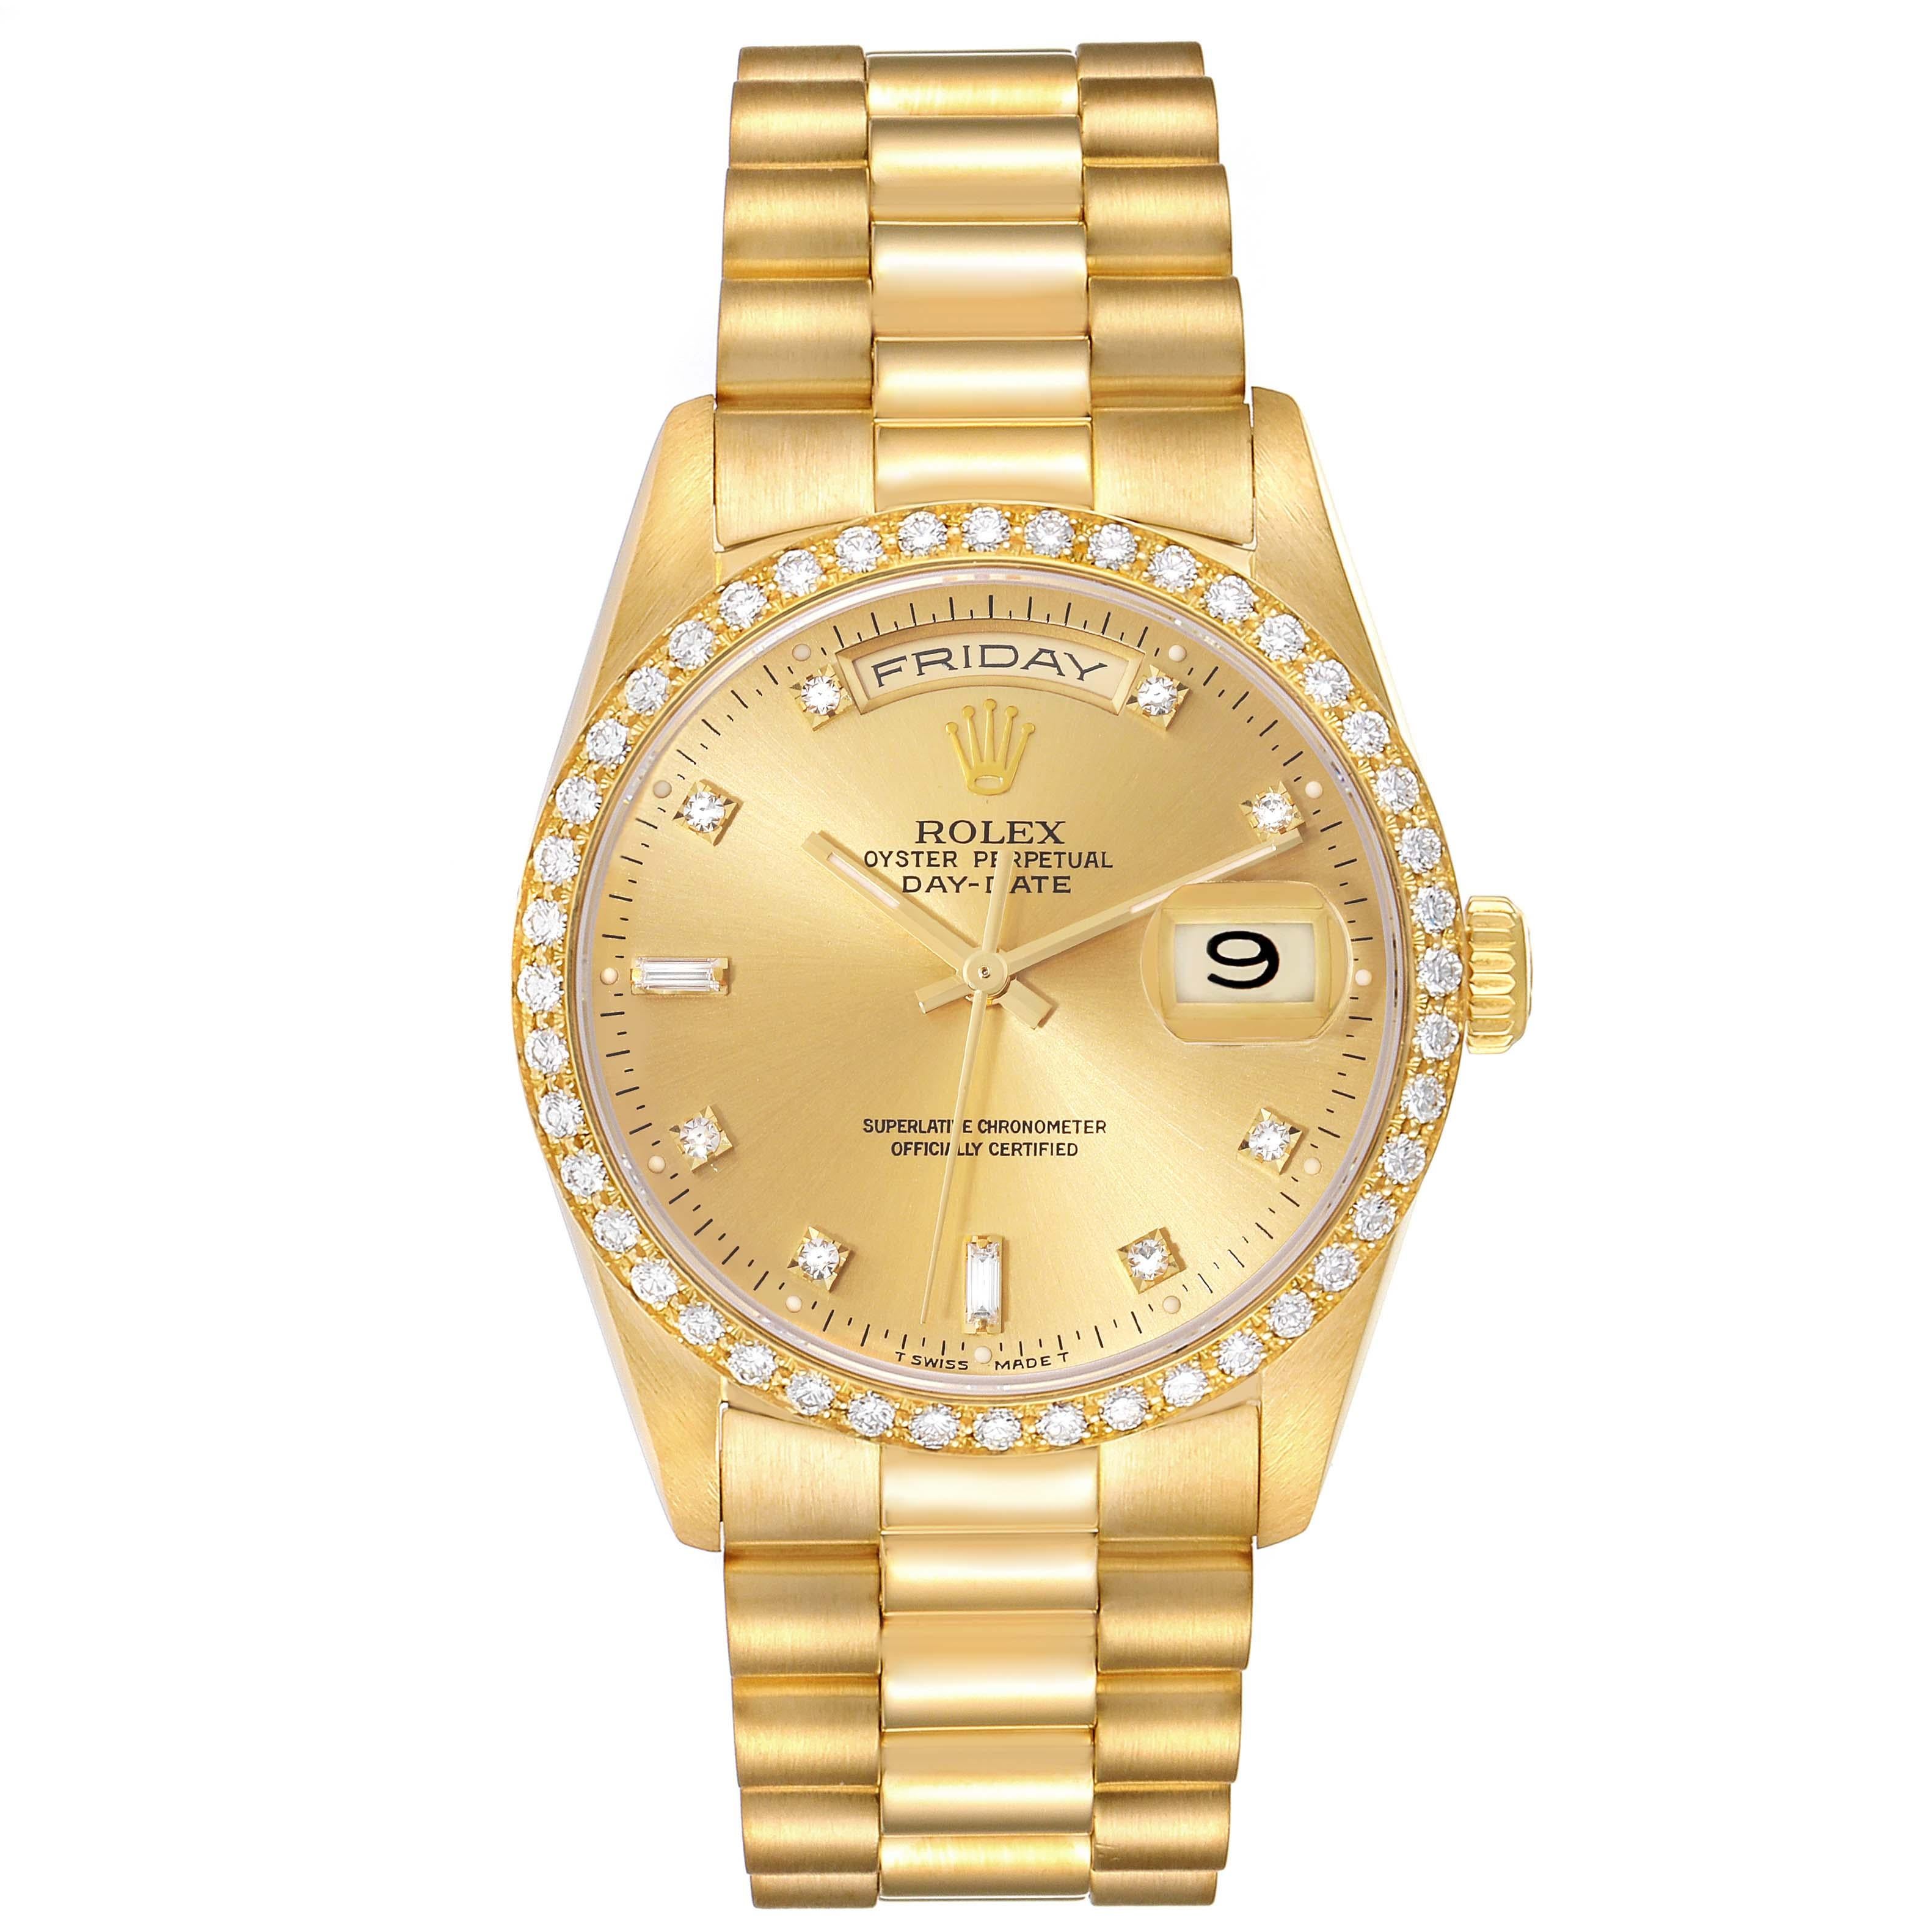 Rolex President Day Date 36mm Yellow Gold Diamond Mens Watch 18348. Officially certified chronometer self-winding movement. 18k yellow gold oyster case 36 mm in diameter. Rolex logo on a crown. Original Rolex factory 18K yellow gold diamond bezel.